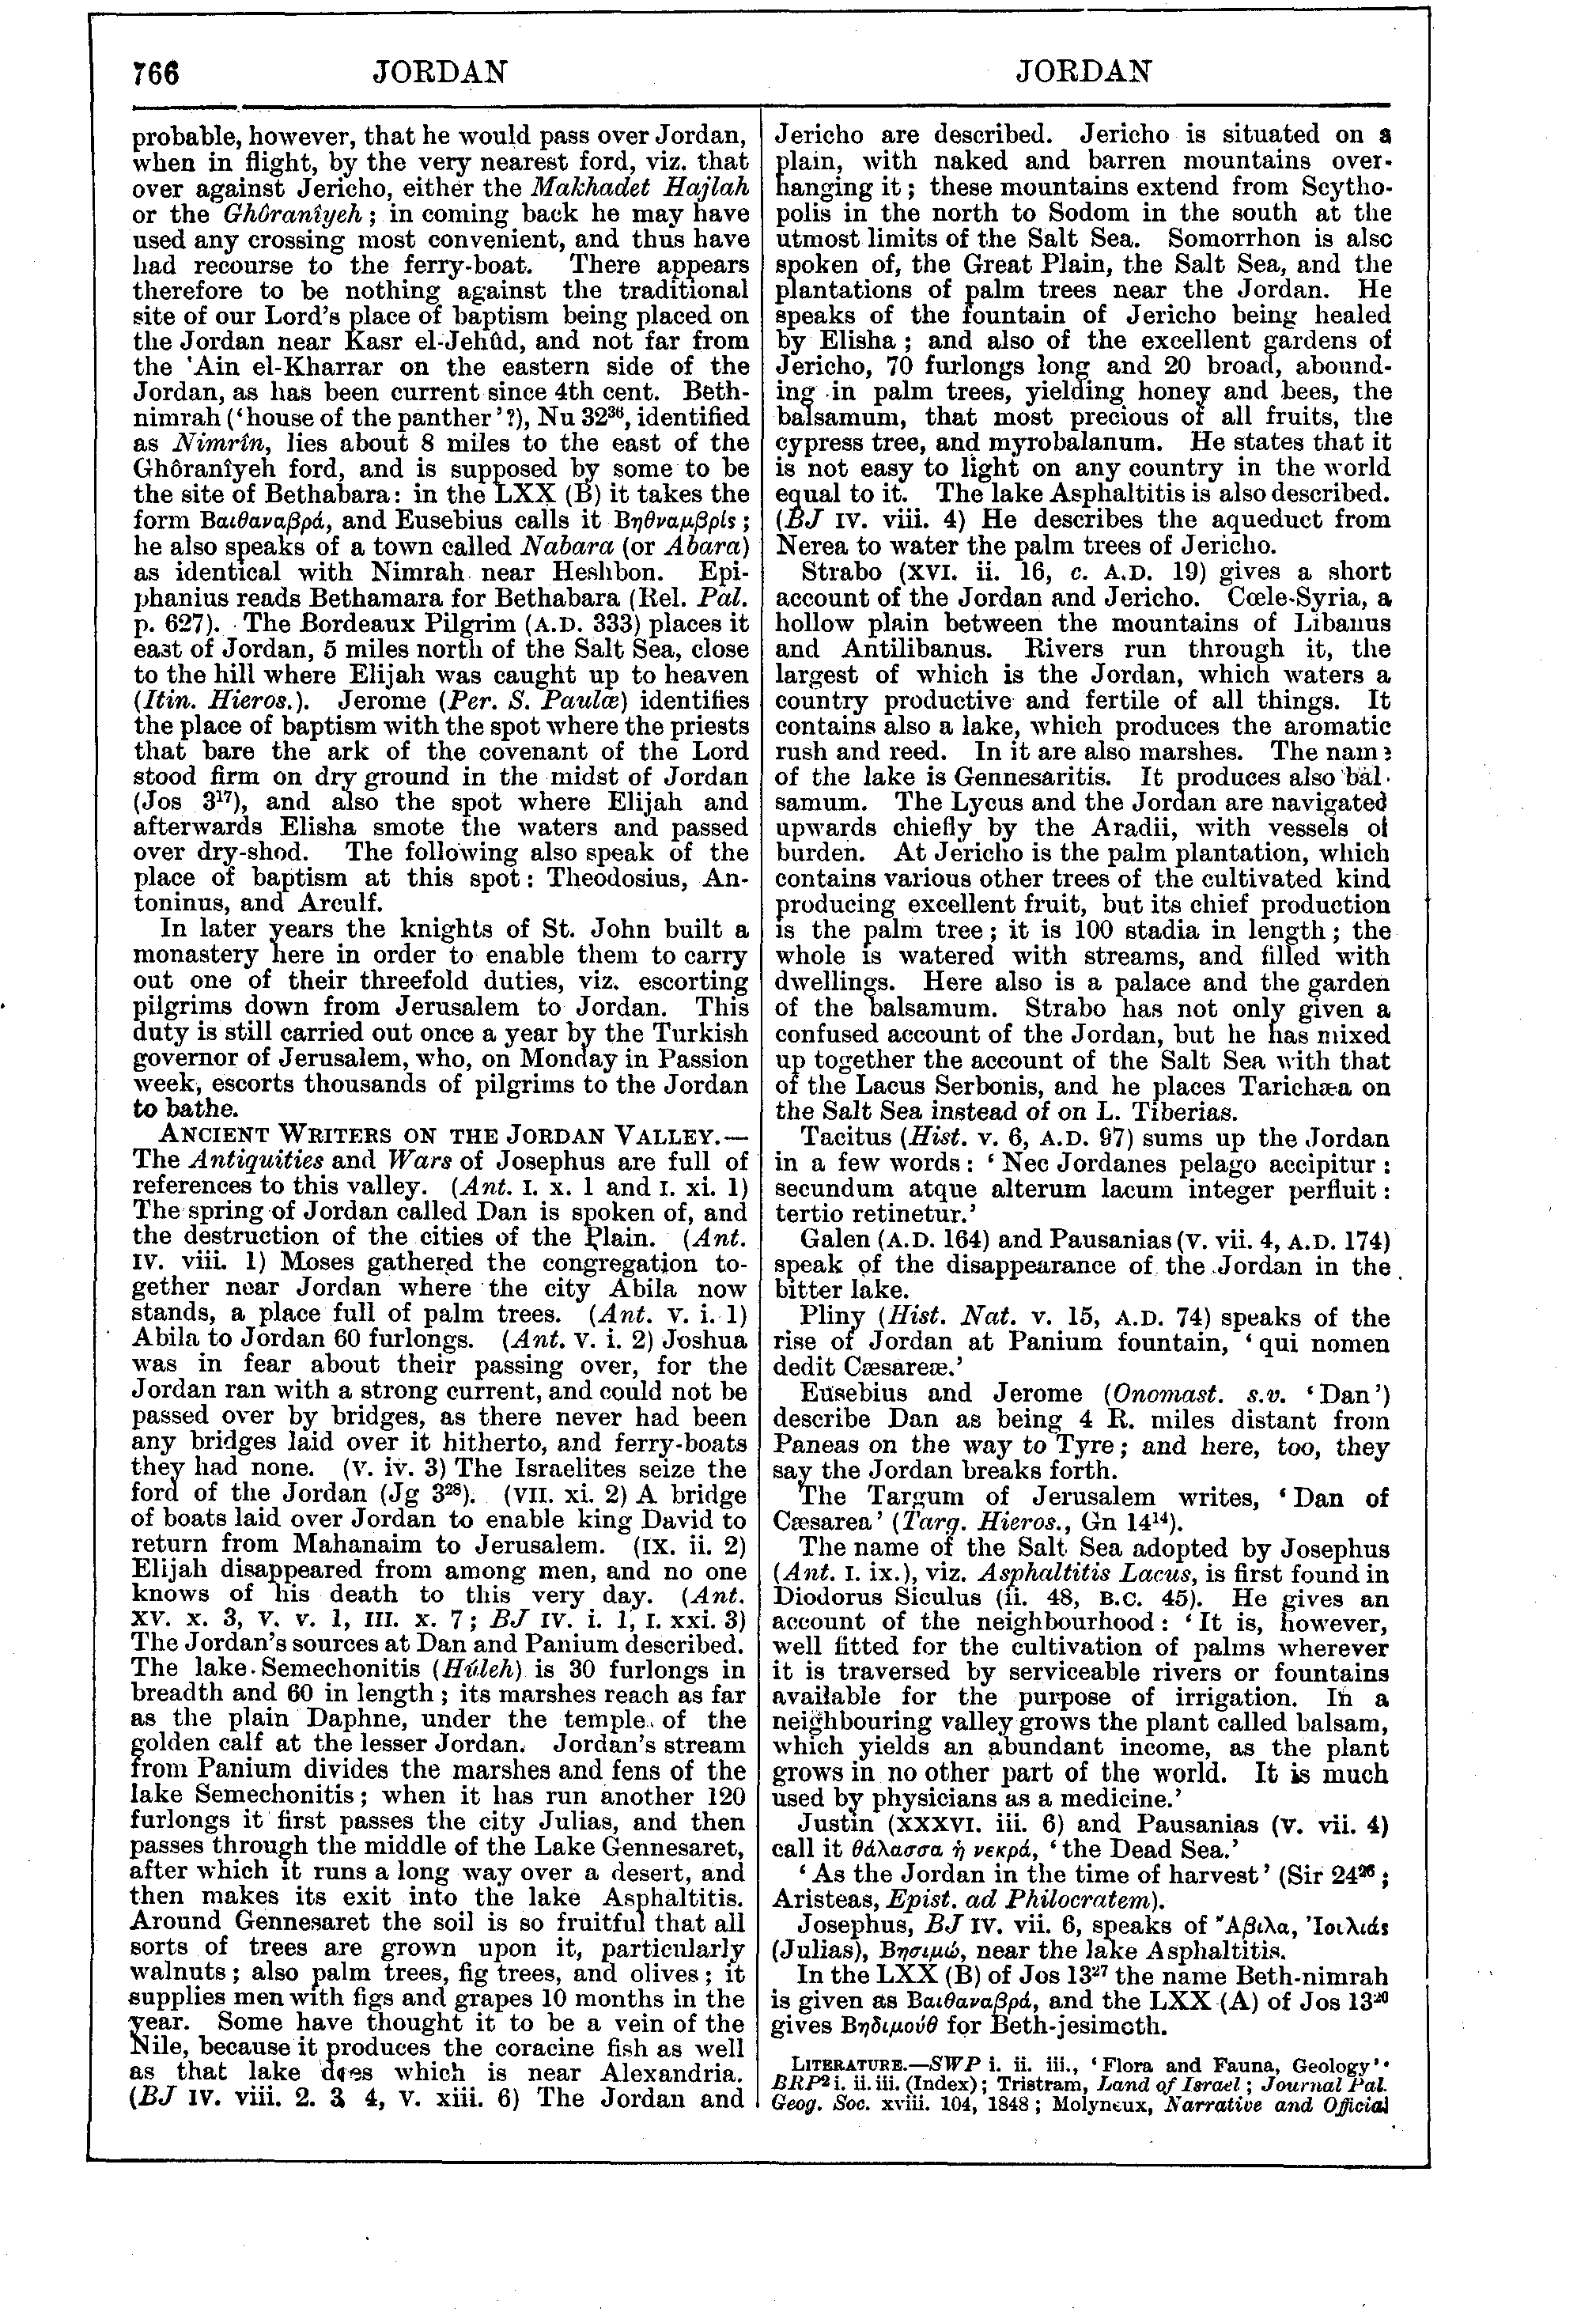 Image of page 766